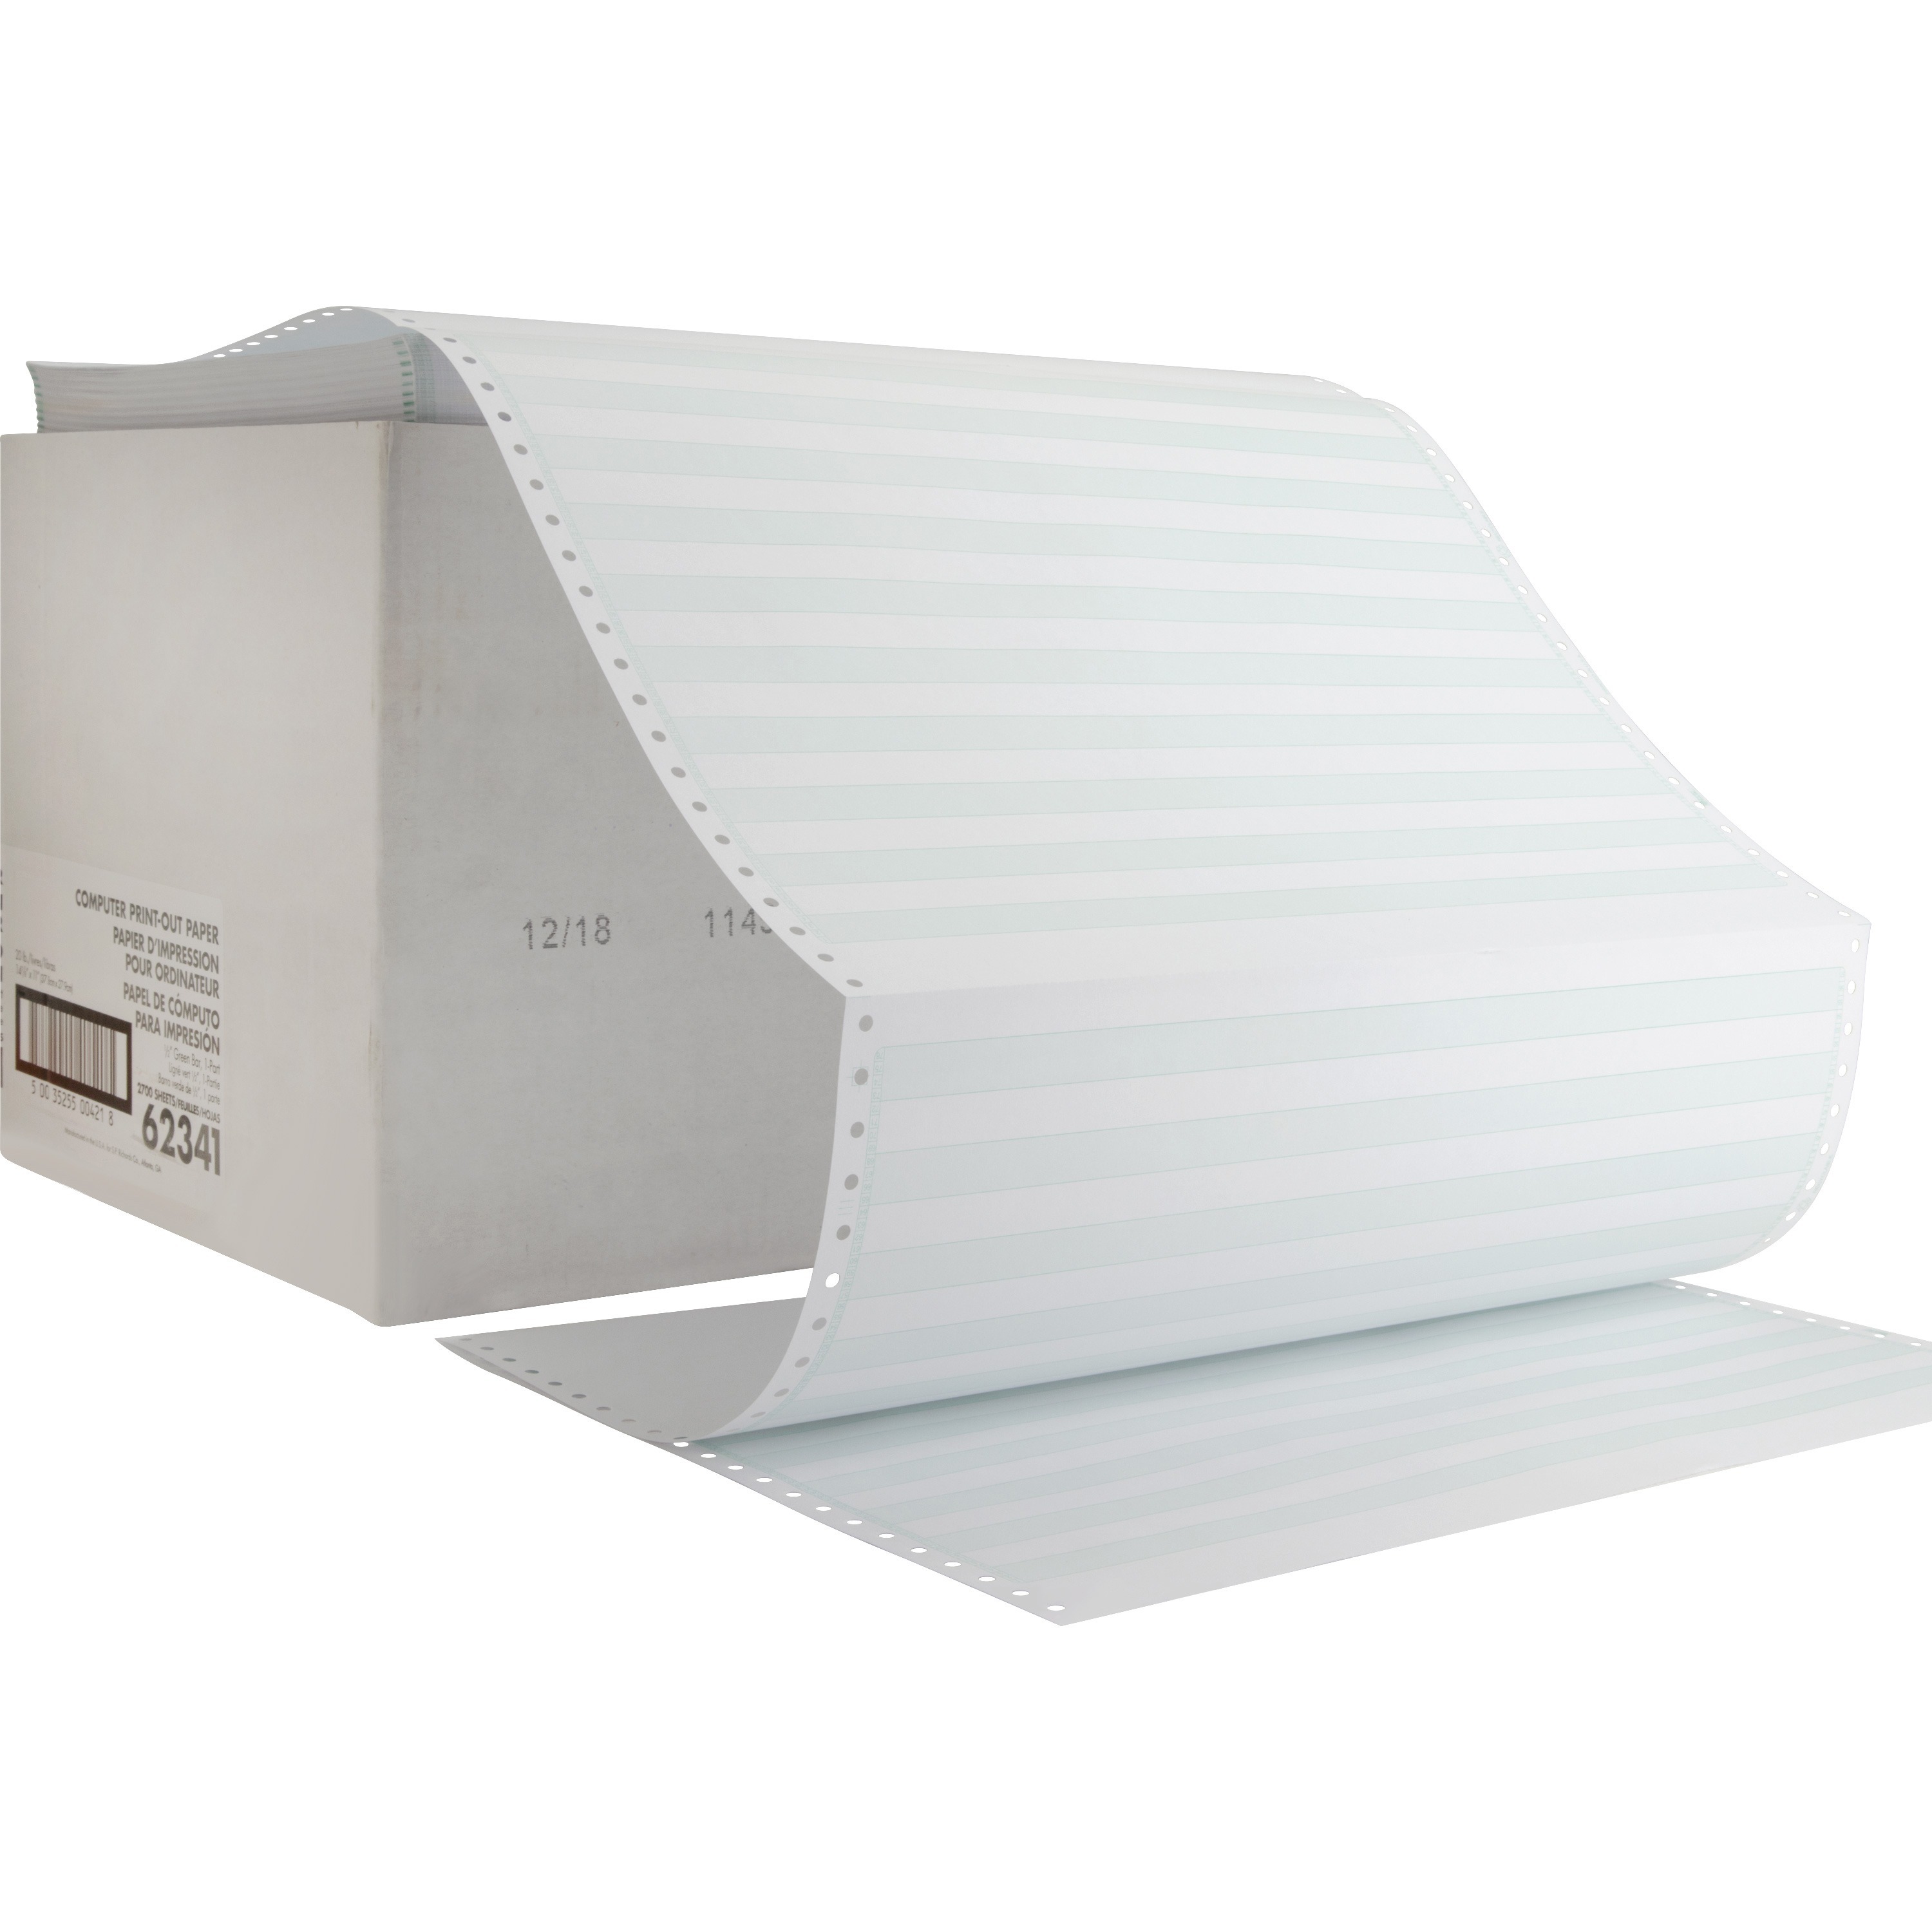 Sparco Perforated Blank Computer Paper - 8 1/2 x 11 - 20 lb Basis Weight  - 230 / Carton - Perforated - White - Computer Paper, Sparco Products